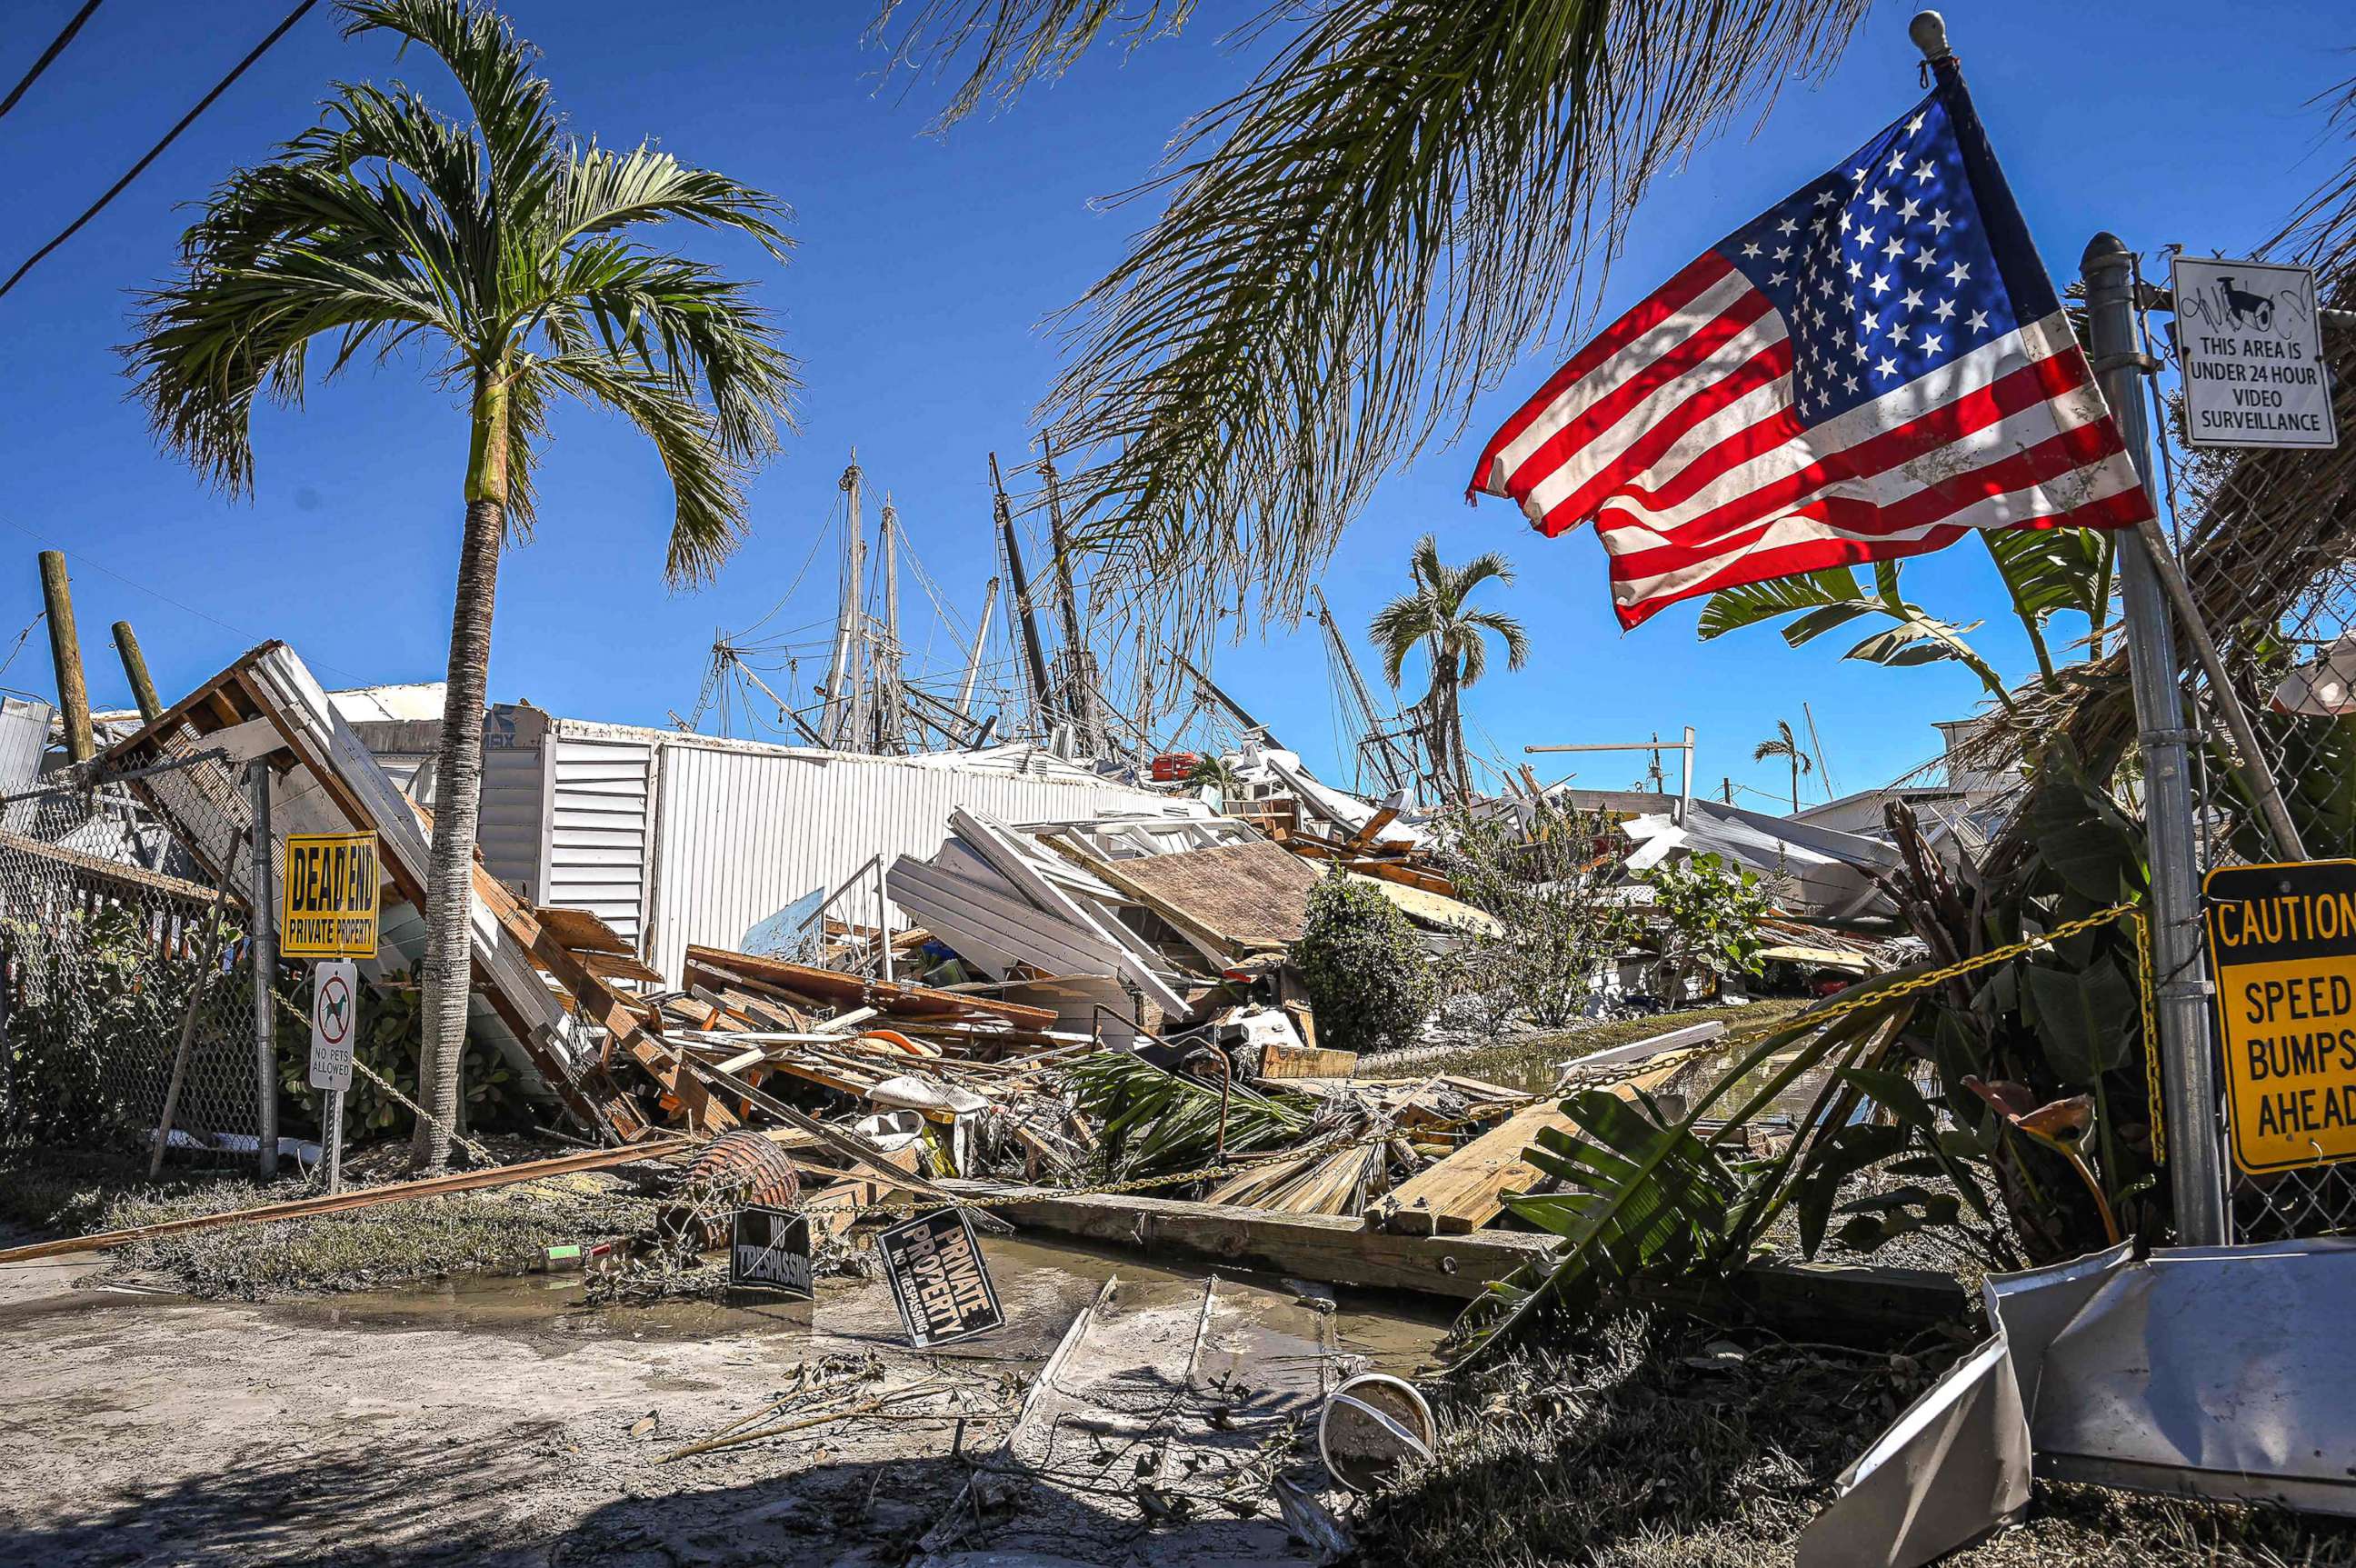 PHOTO: Part of a destroyed mobile home park is pictured in the aftermath of Hurricane Ian in Fort Myers Beach, Fla., on Sept. 30, 2022.